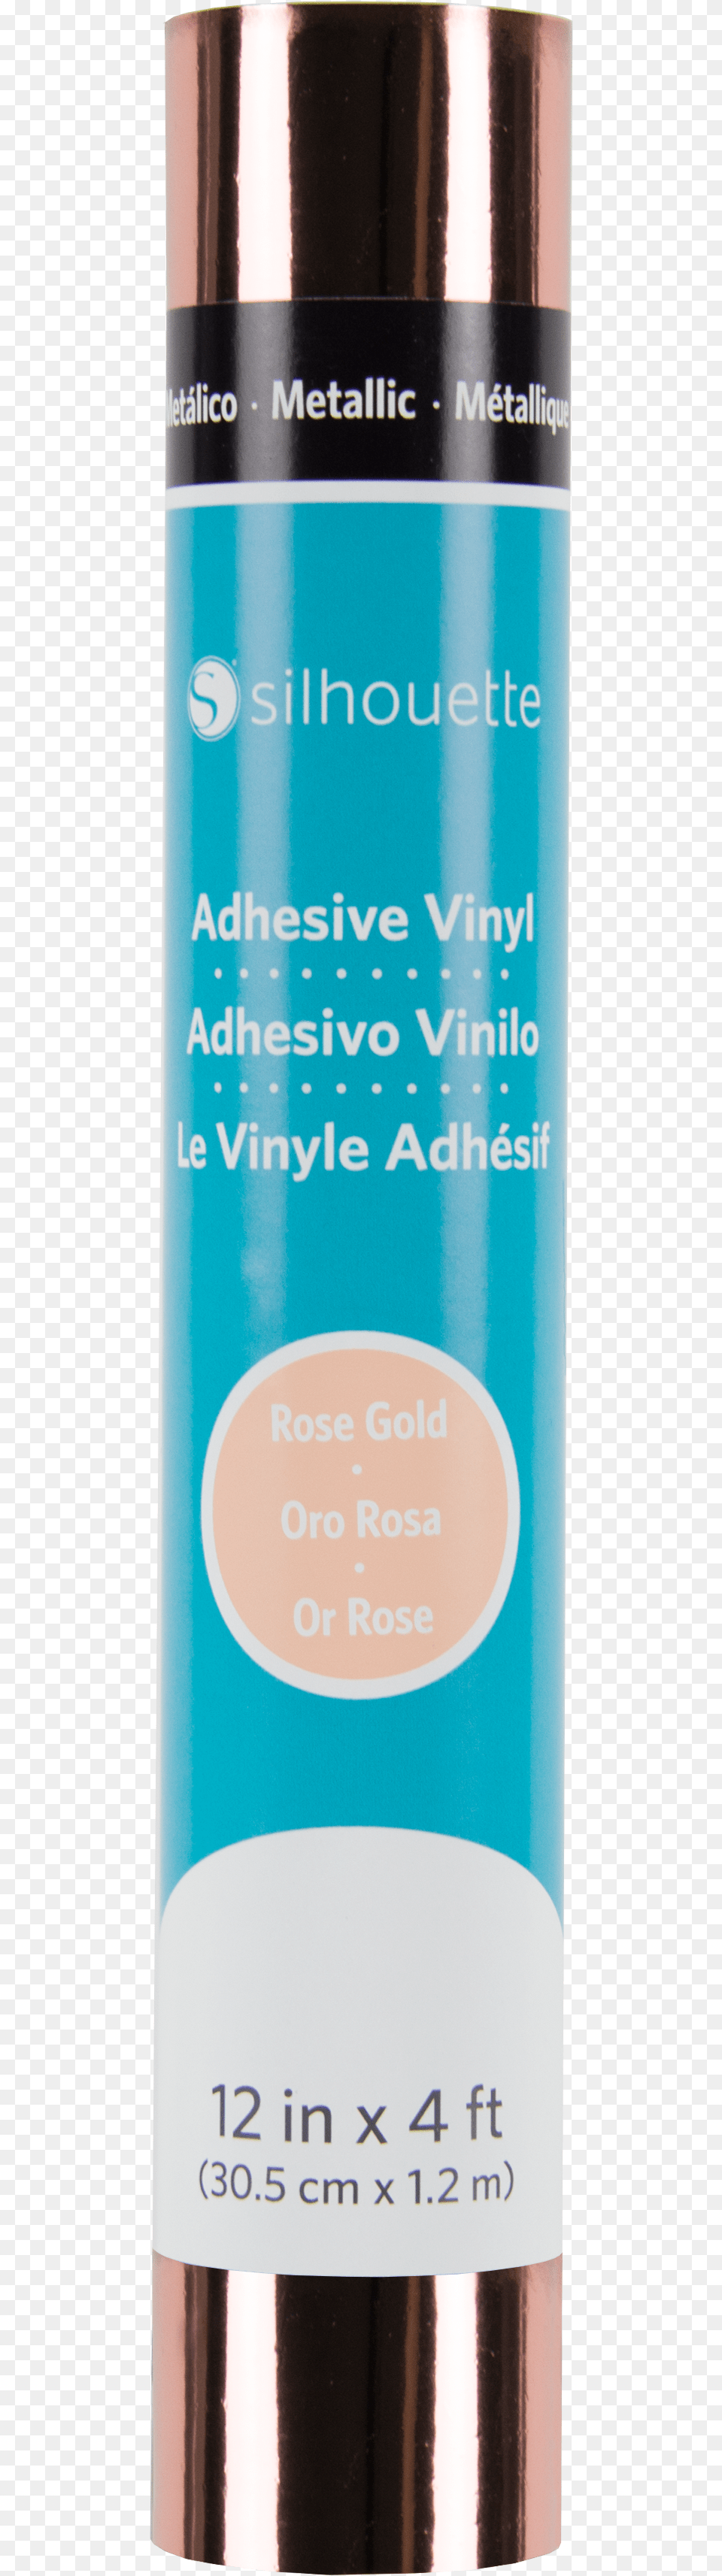 Rose Gold Silhouette Vinyl Roll Silhouette Cameo 3 Vinile, Cosmetics, Deodorant, Can, Tin Png